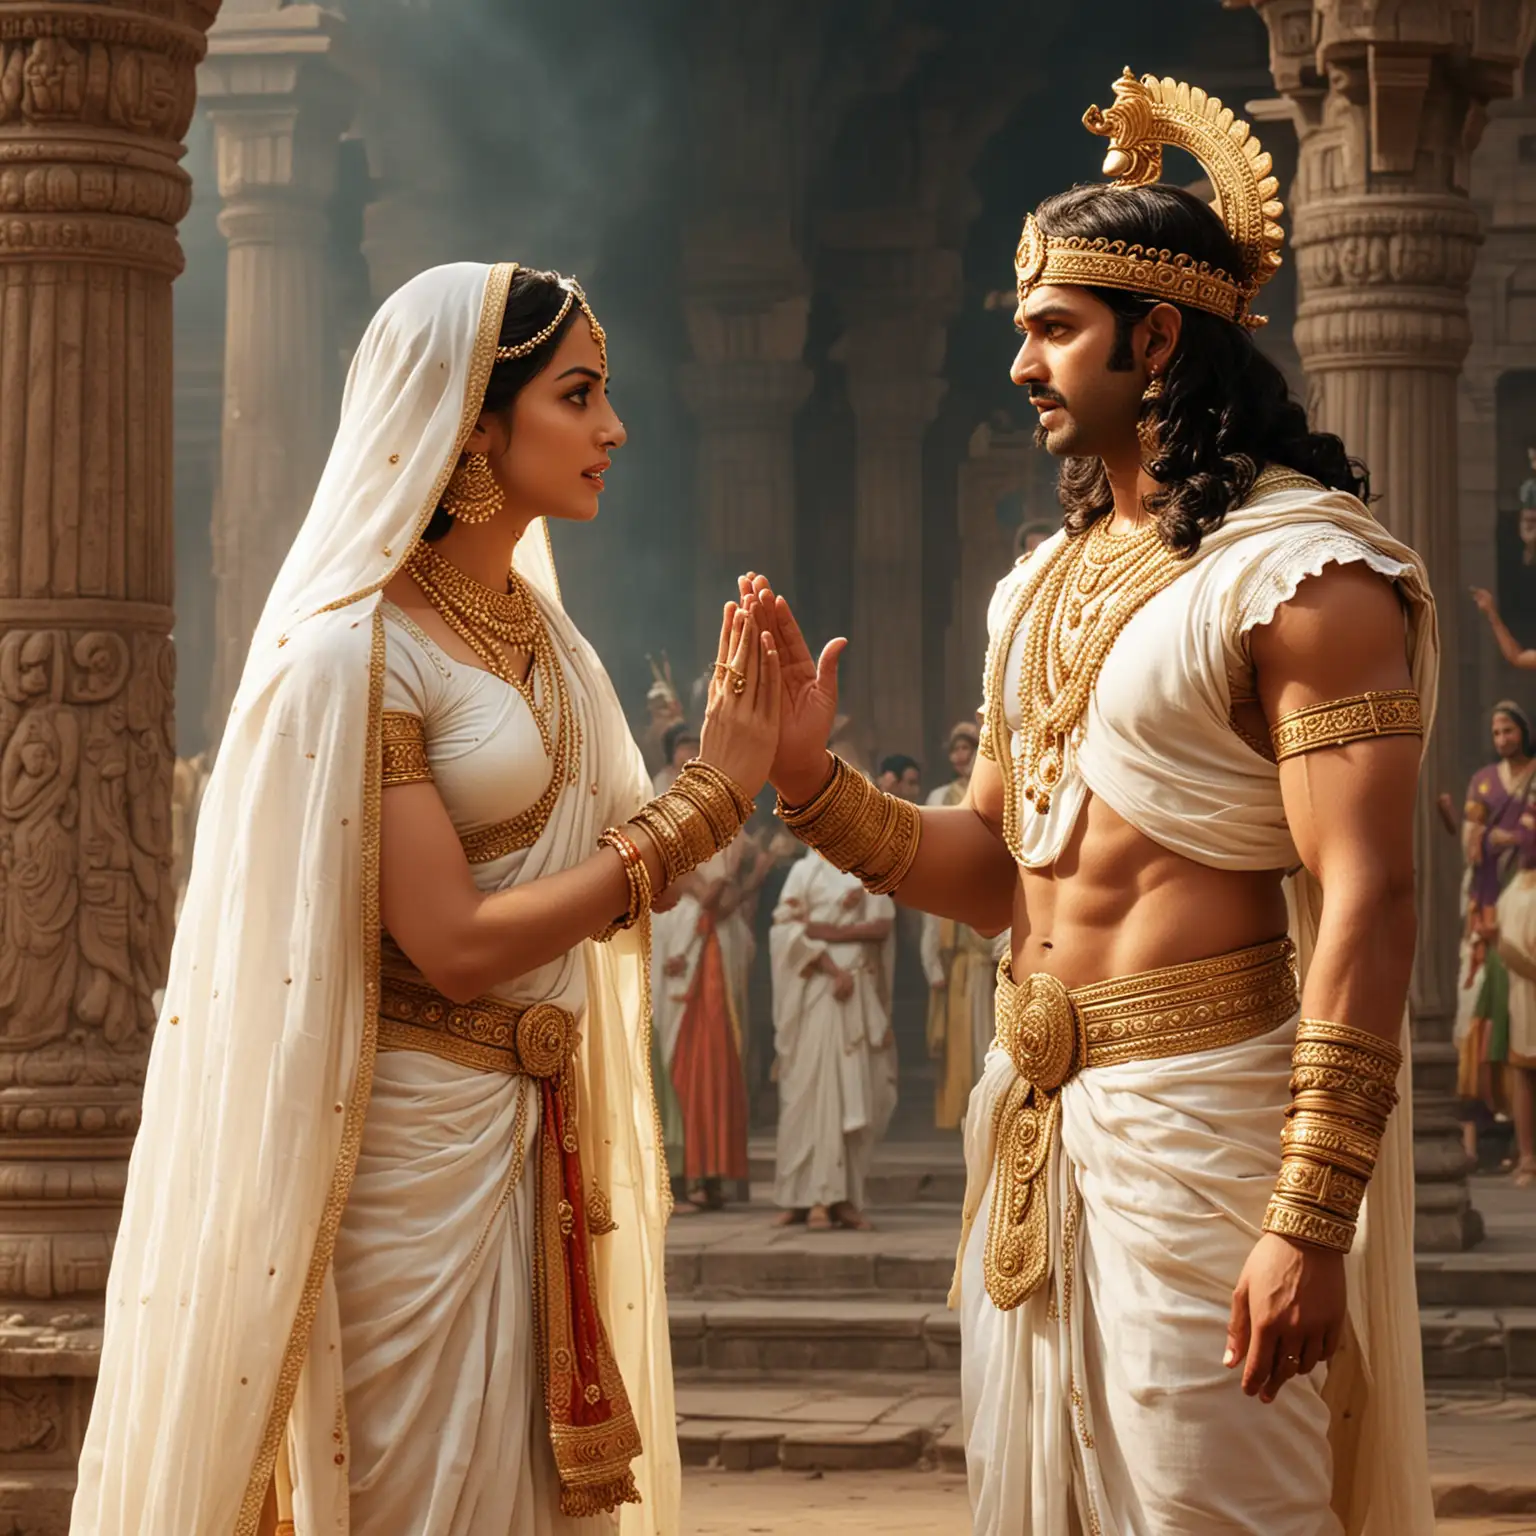 generate mahabharat character bhisma male dressed in white standing and having conversation with princess amba in an argument


